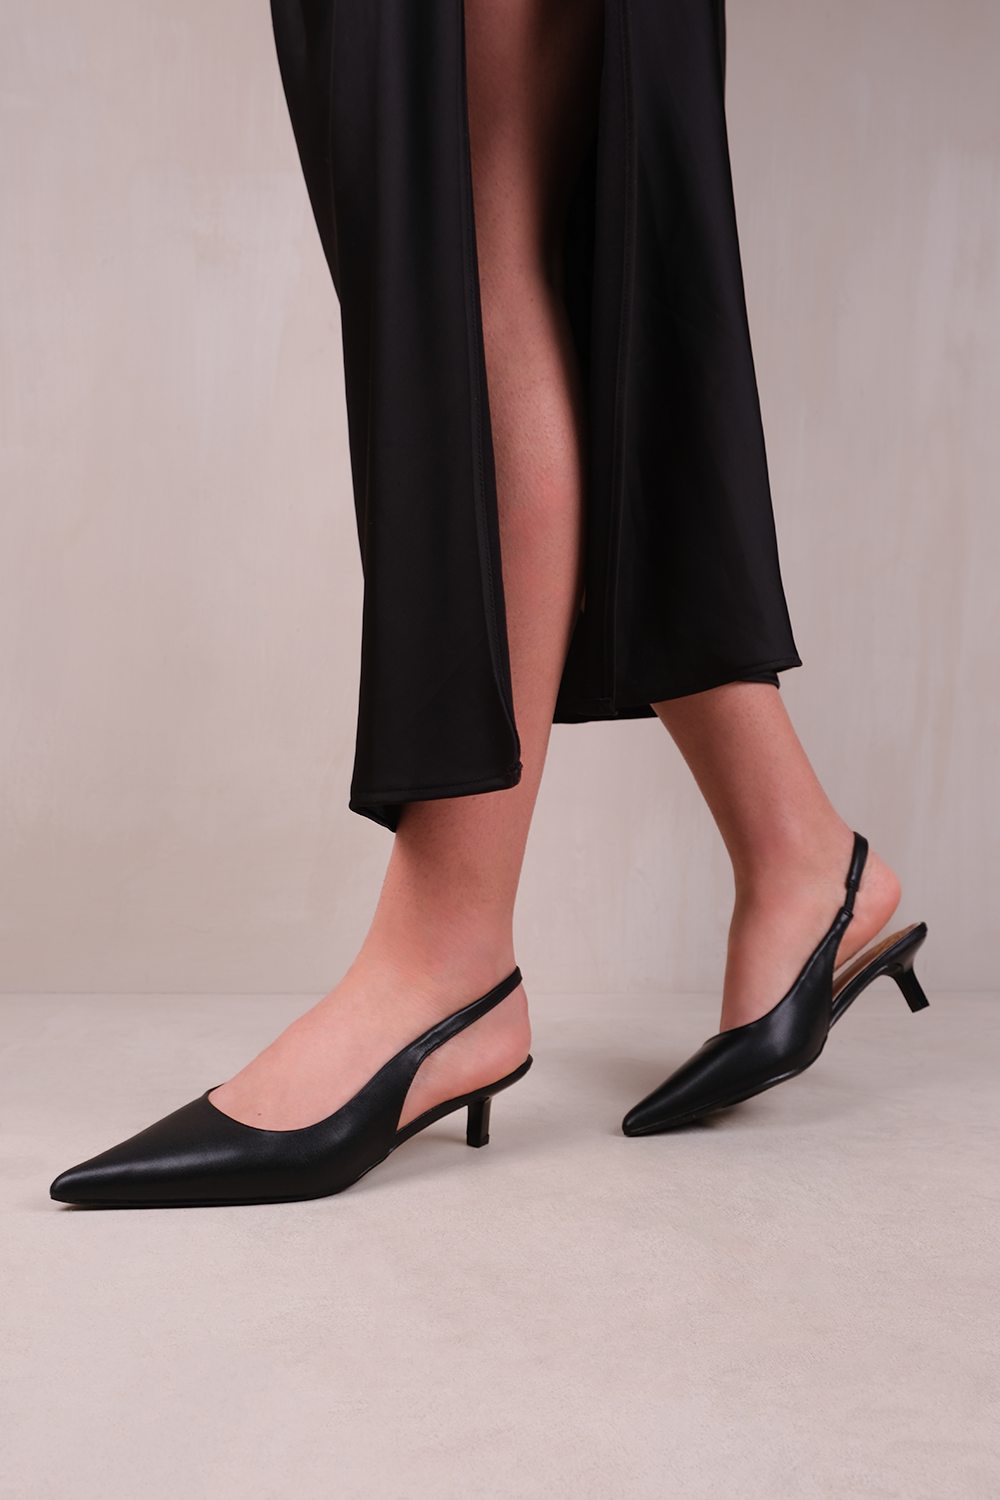 NEW FORM LOW KITTEN HEELS WITH POINTED TOE & ELASTIC SLINGBACK IN BLACK FAUX LEATHER